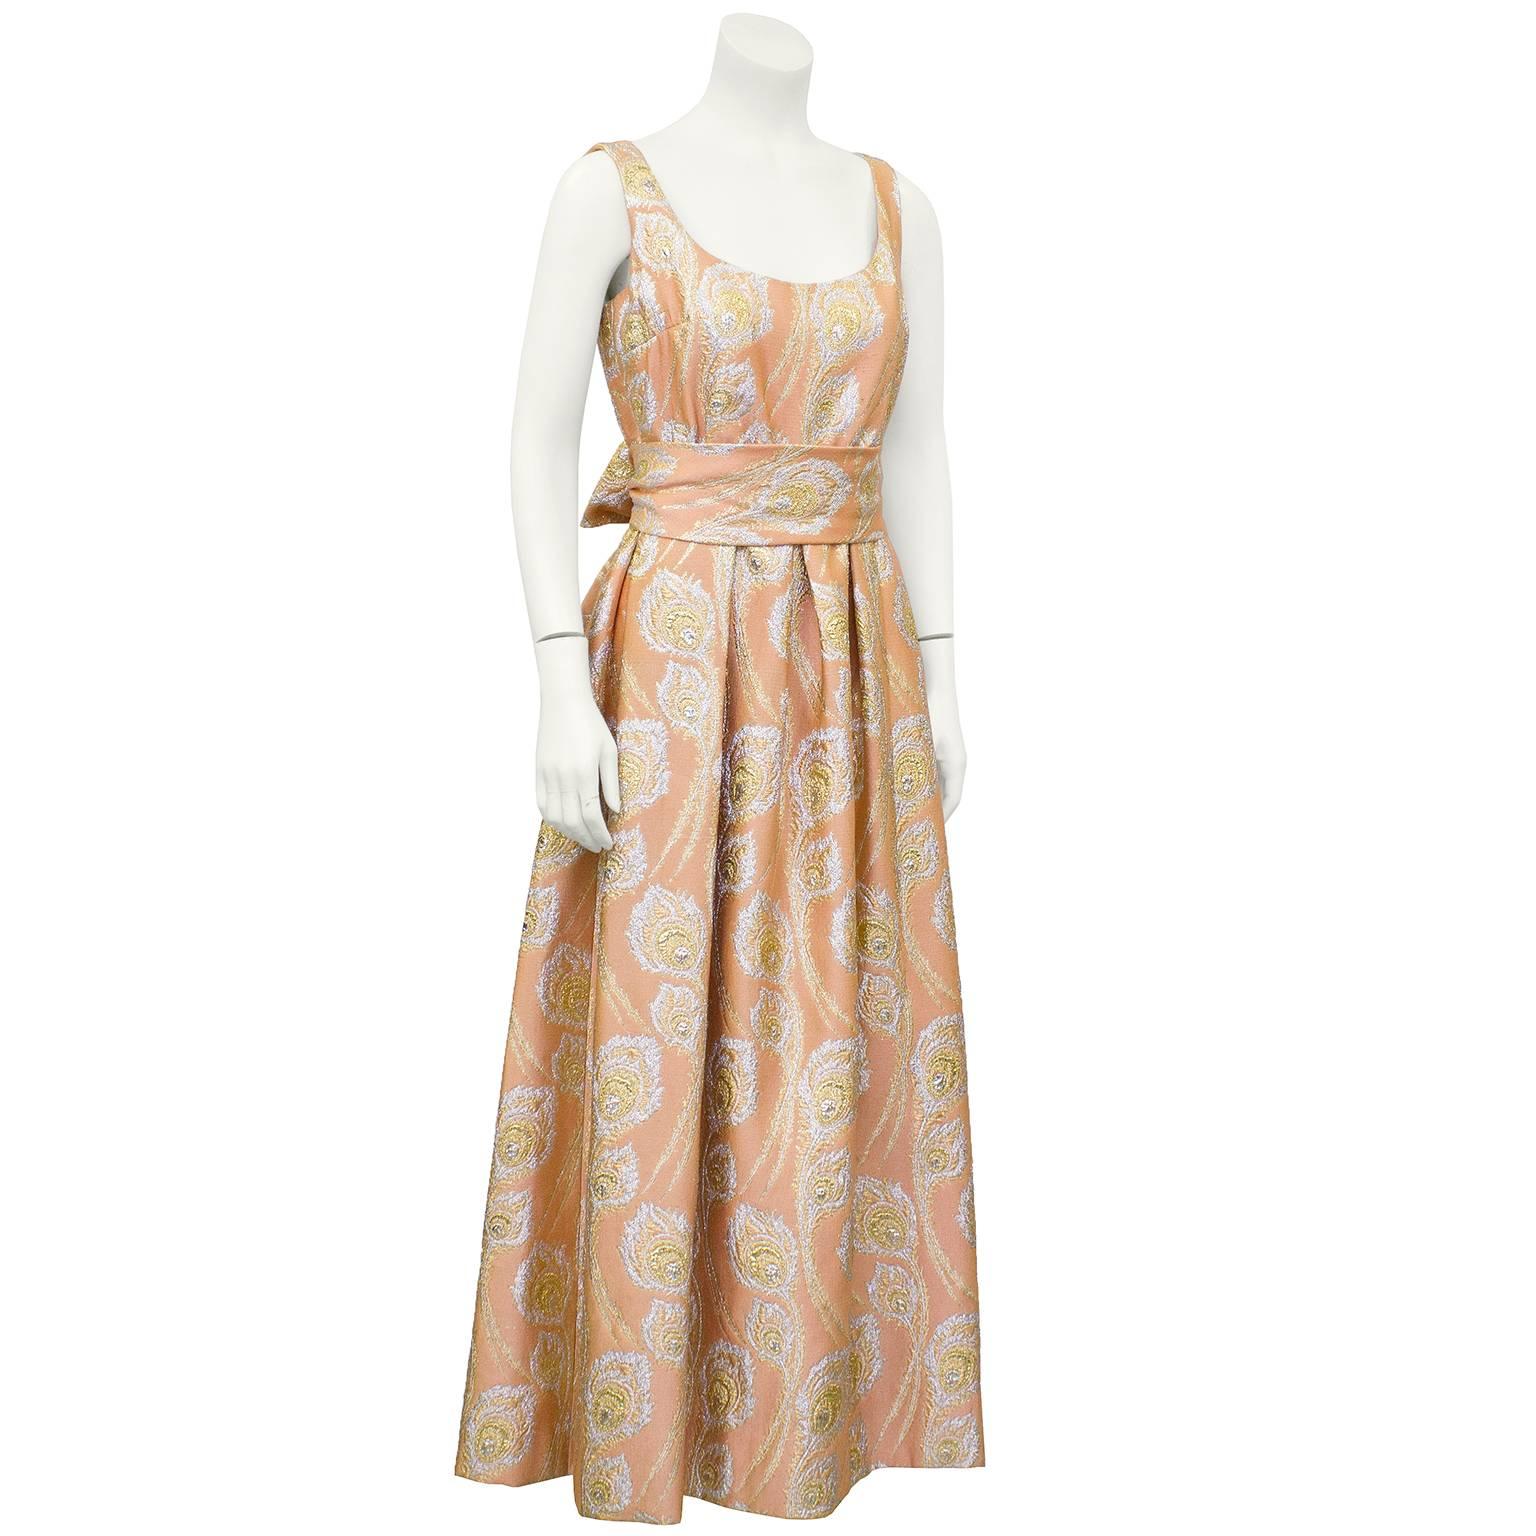 Ceil Chapman gown dating from the late 1960s. Beautiful muted peach and metallic brocade featuring peacock feathers all over. Scoop neck, empire waist and full skirt. Optional matching sash to tie at waist. Very good vintage condition, slight wear